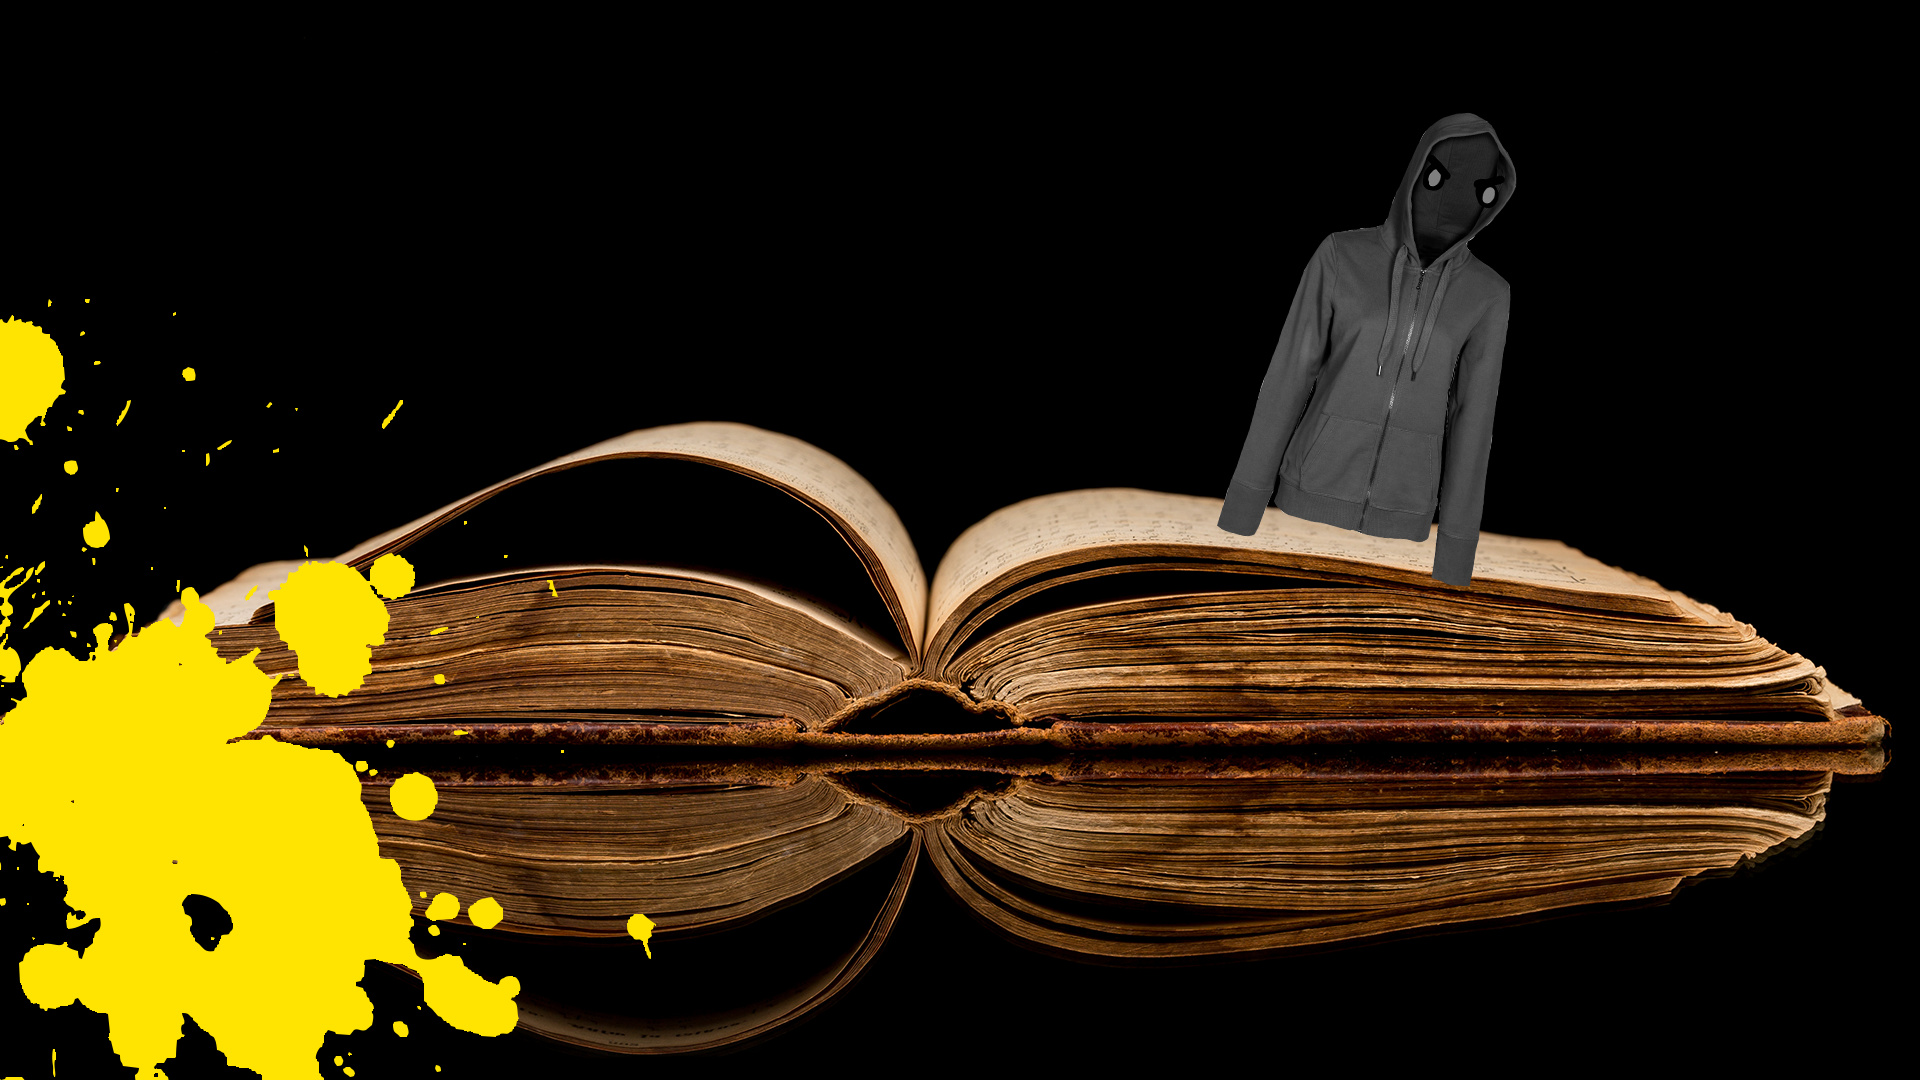 Dementor popping out of a book with splat